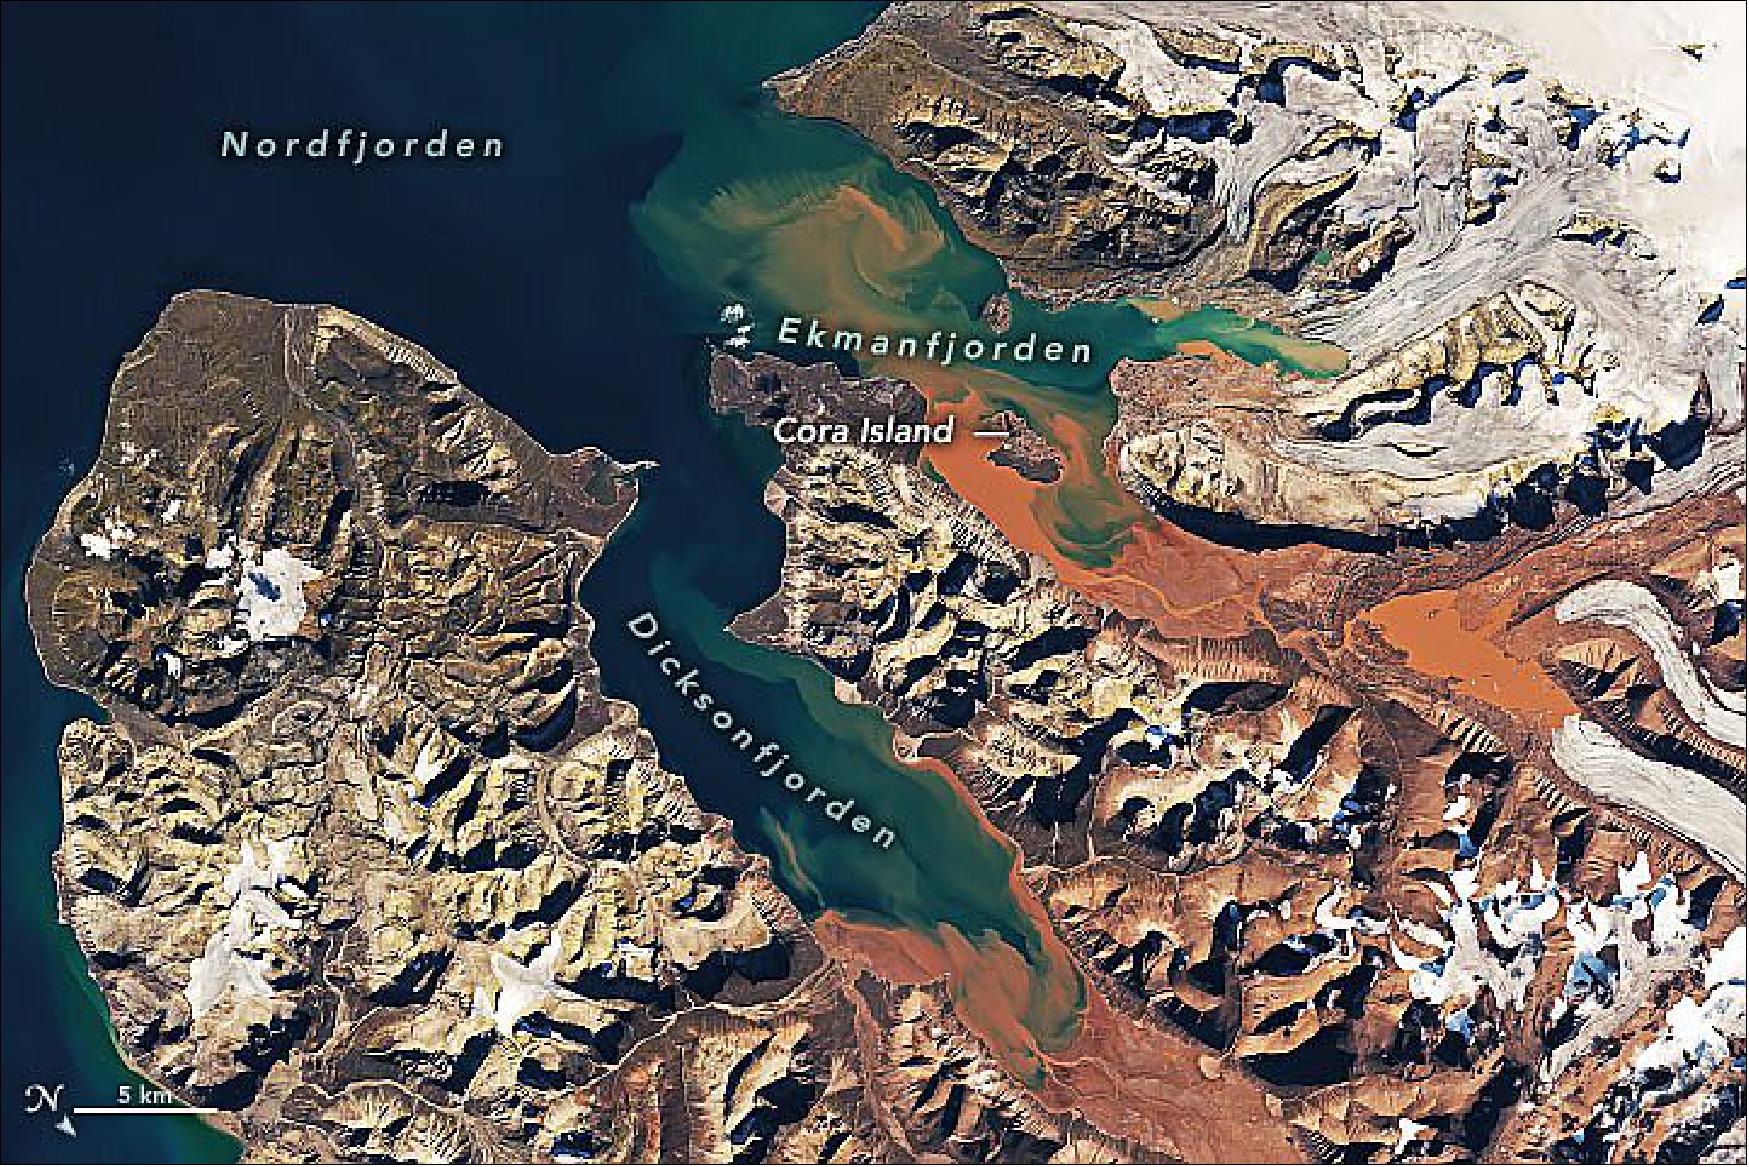 Figure 9: This image shows a wider view. Note that the image has been rotated to combat relief inversion, an optical illusion that can make valleys look like mountains (image credit: NASA Earth Observatory)